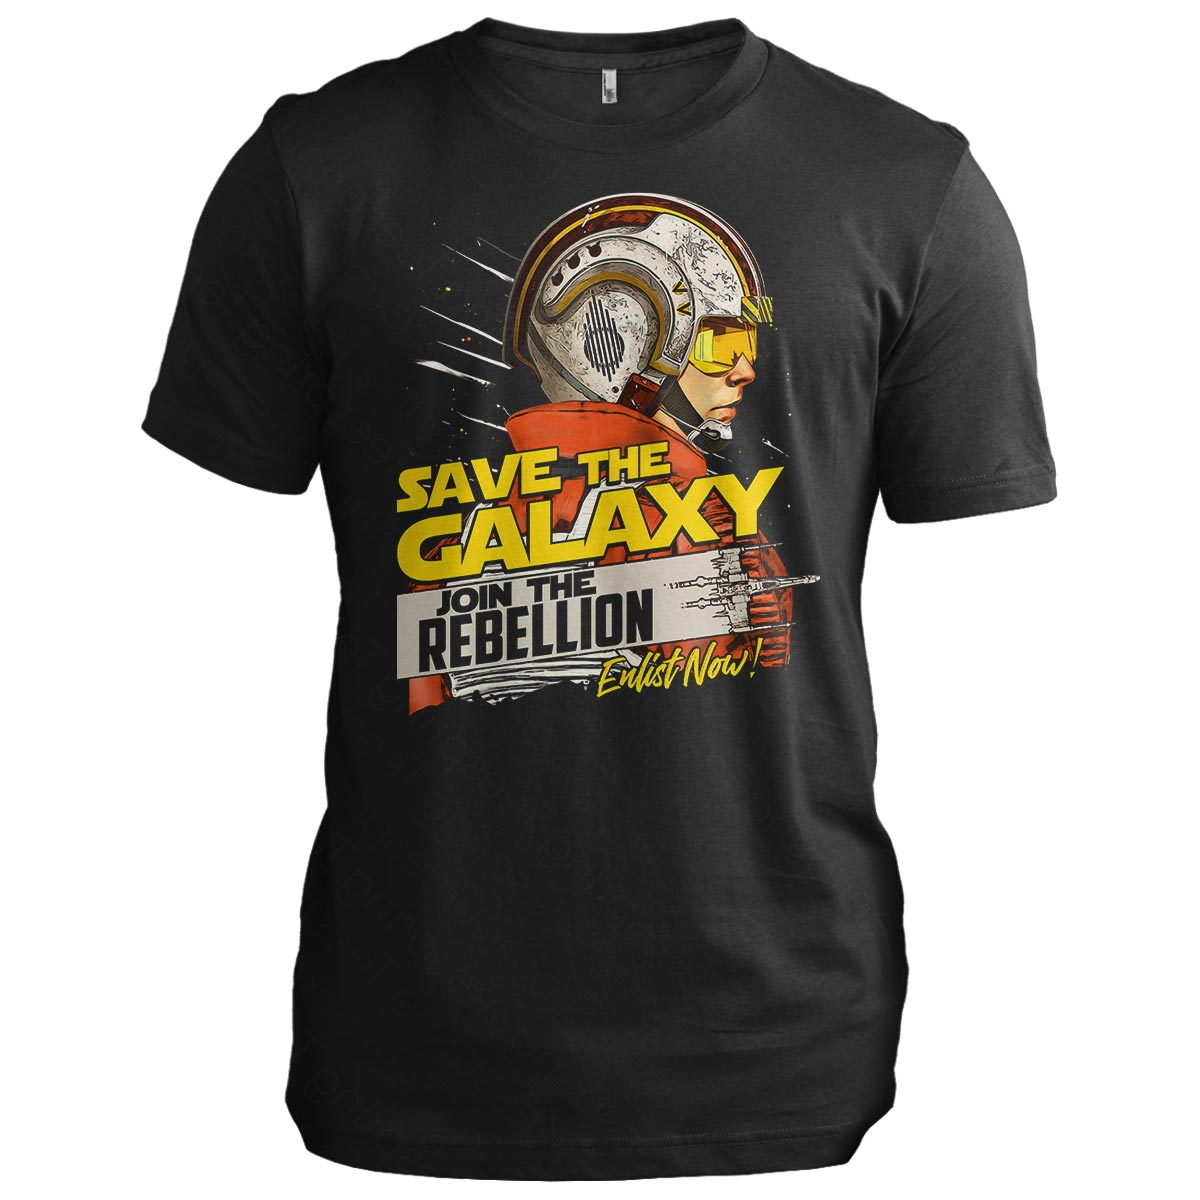 Join The Rebellion: Enlist Now!